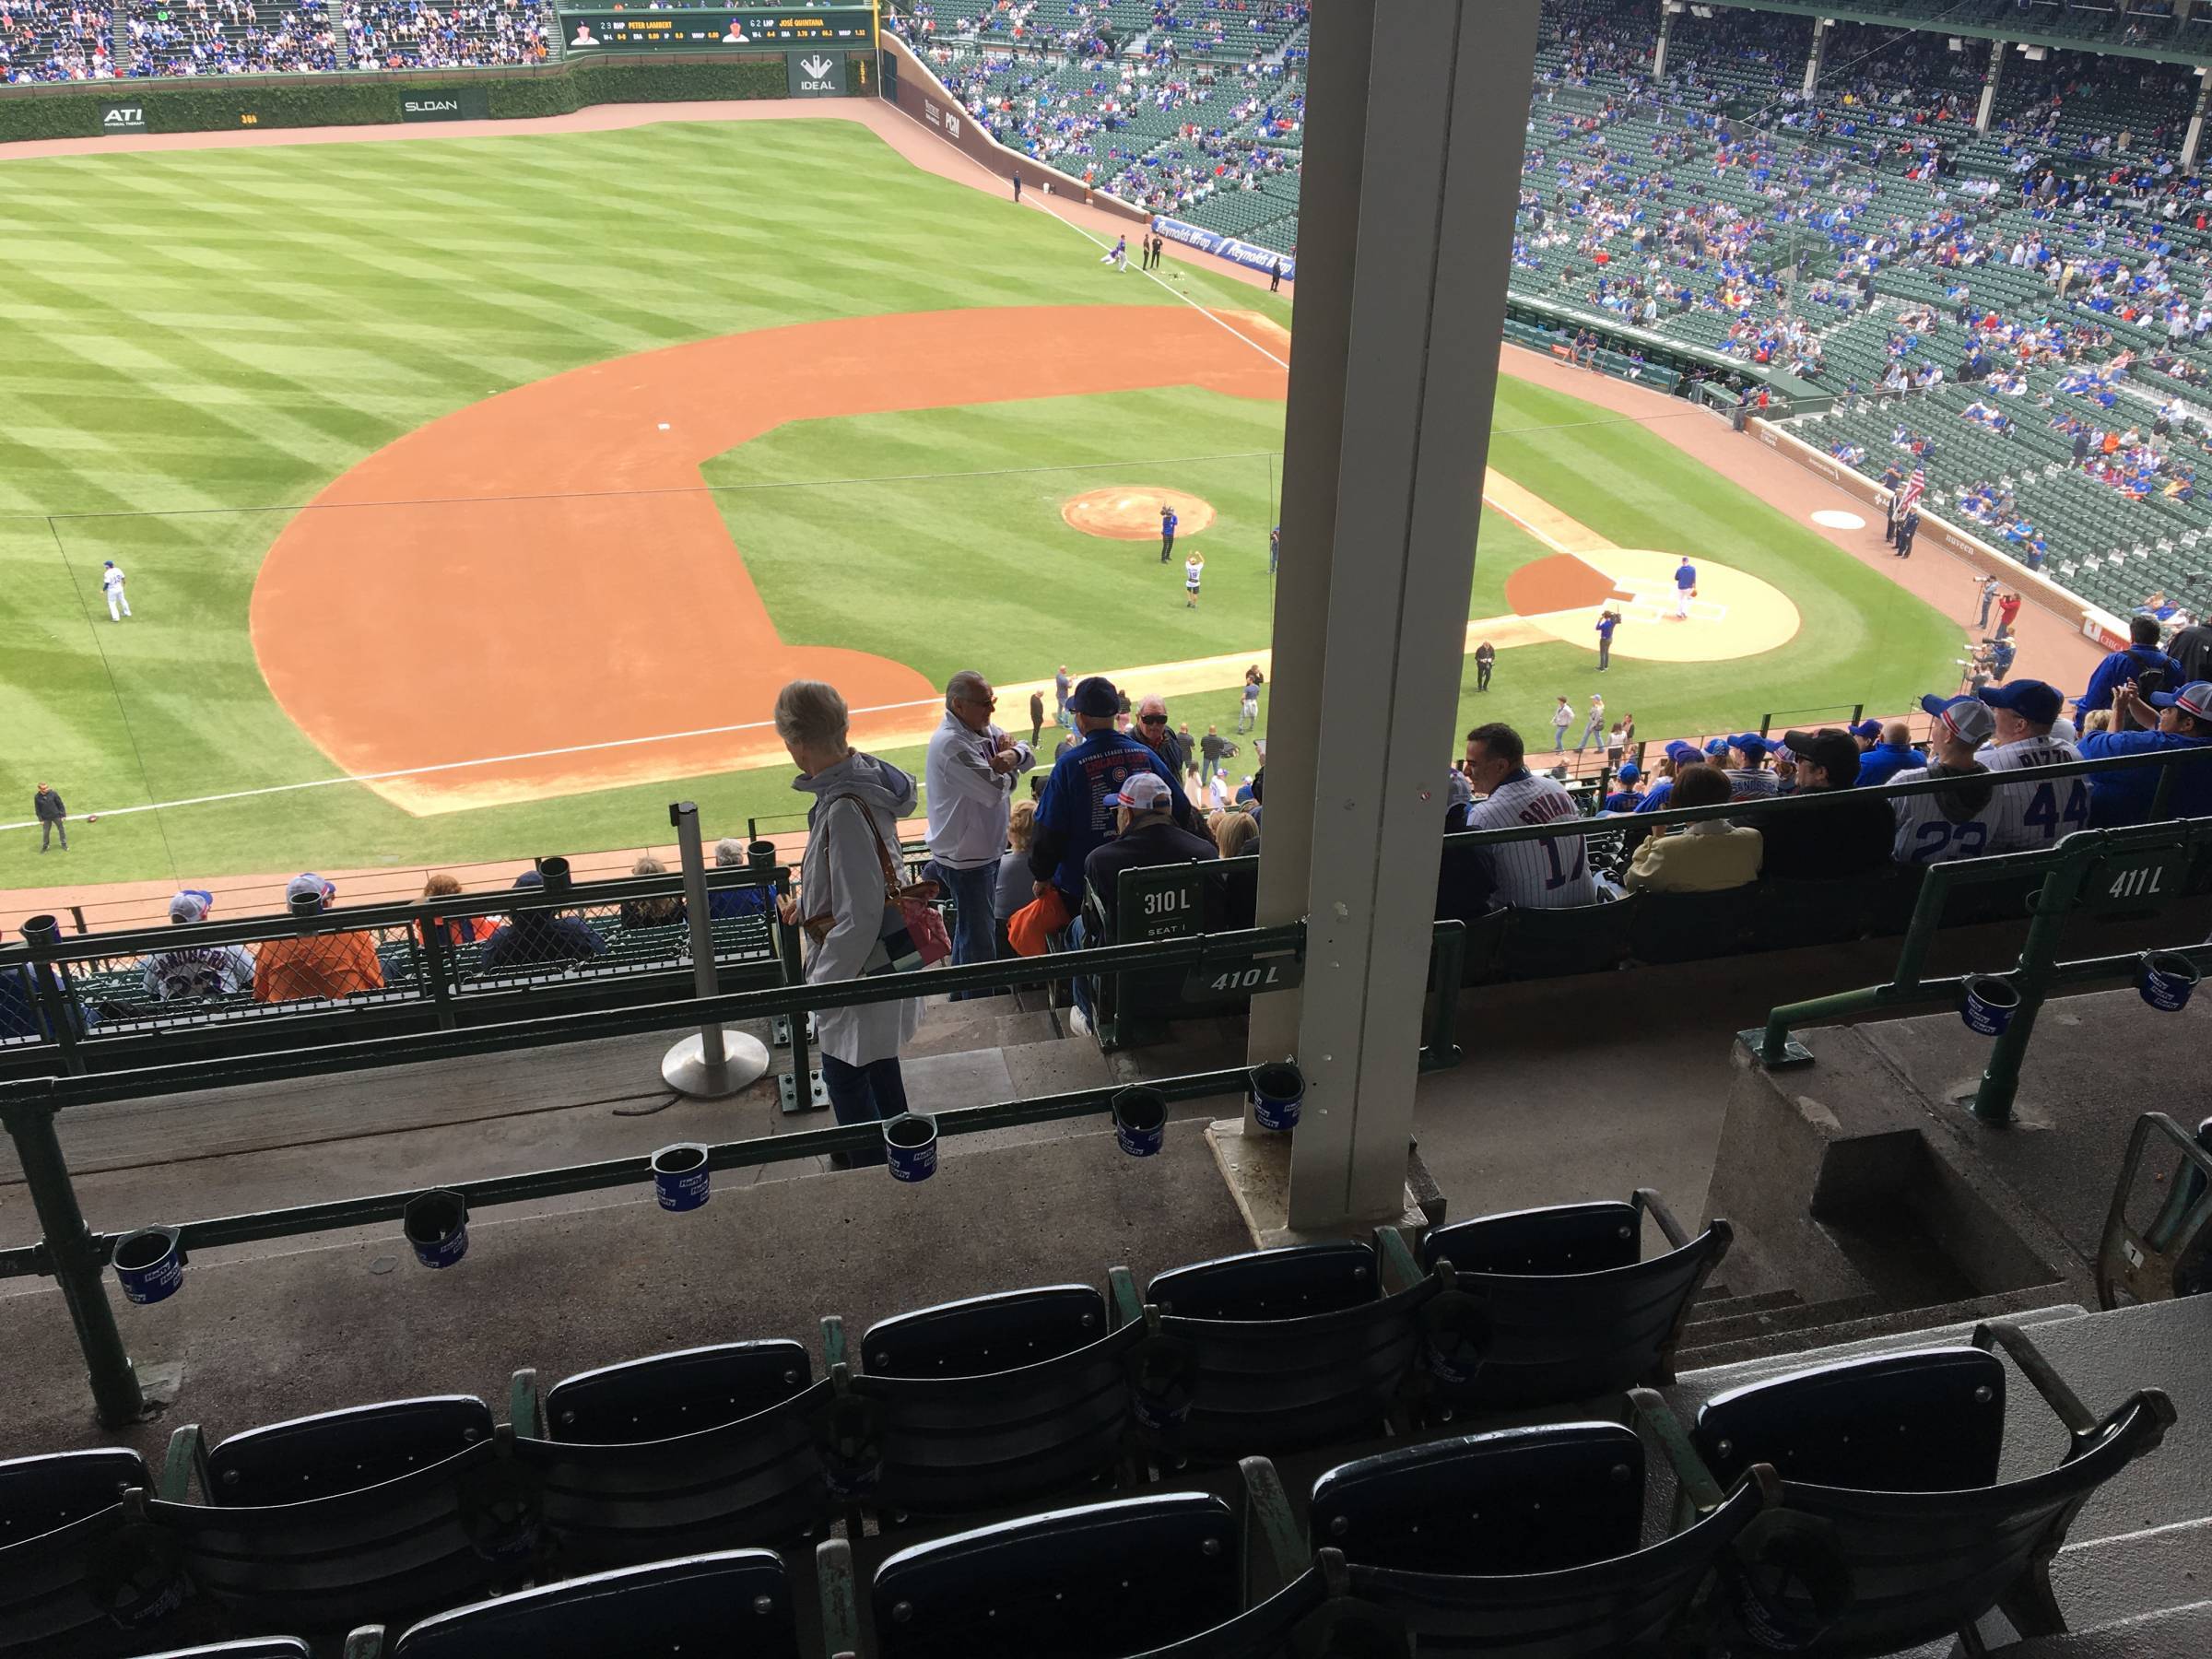 Pole in Section 410L at Wrigley Field